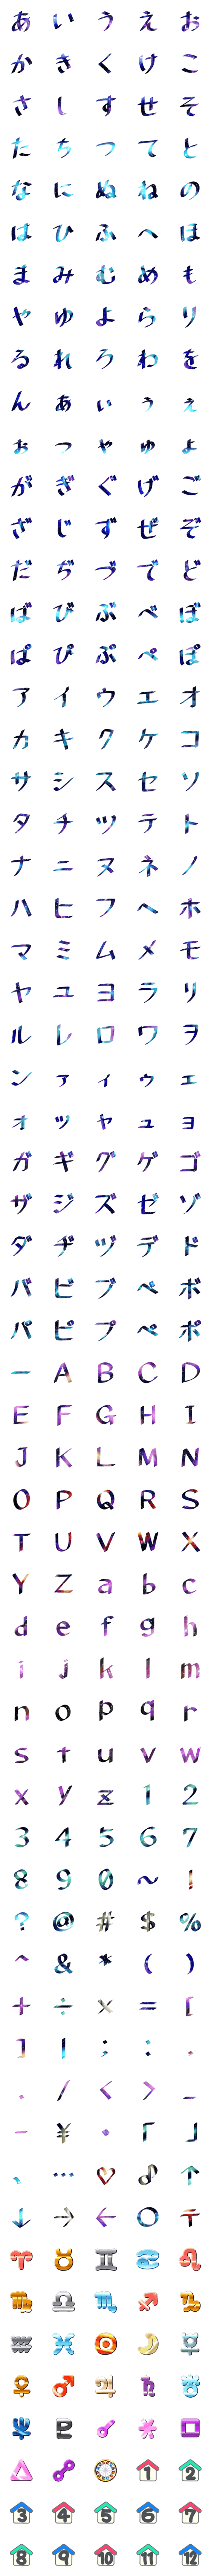 [LINE絵文字]ギャラクシー文字と惑星、星座、占星絵文字の画像一覧